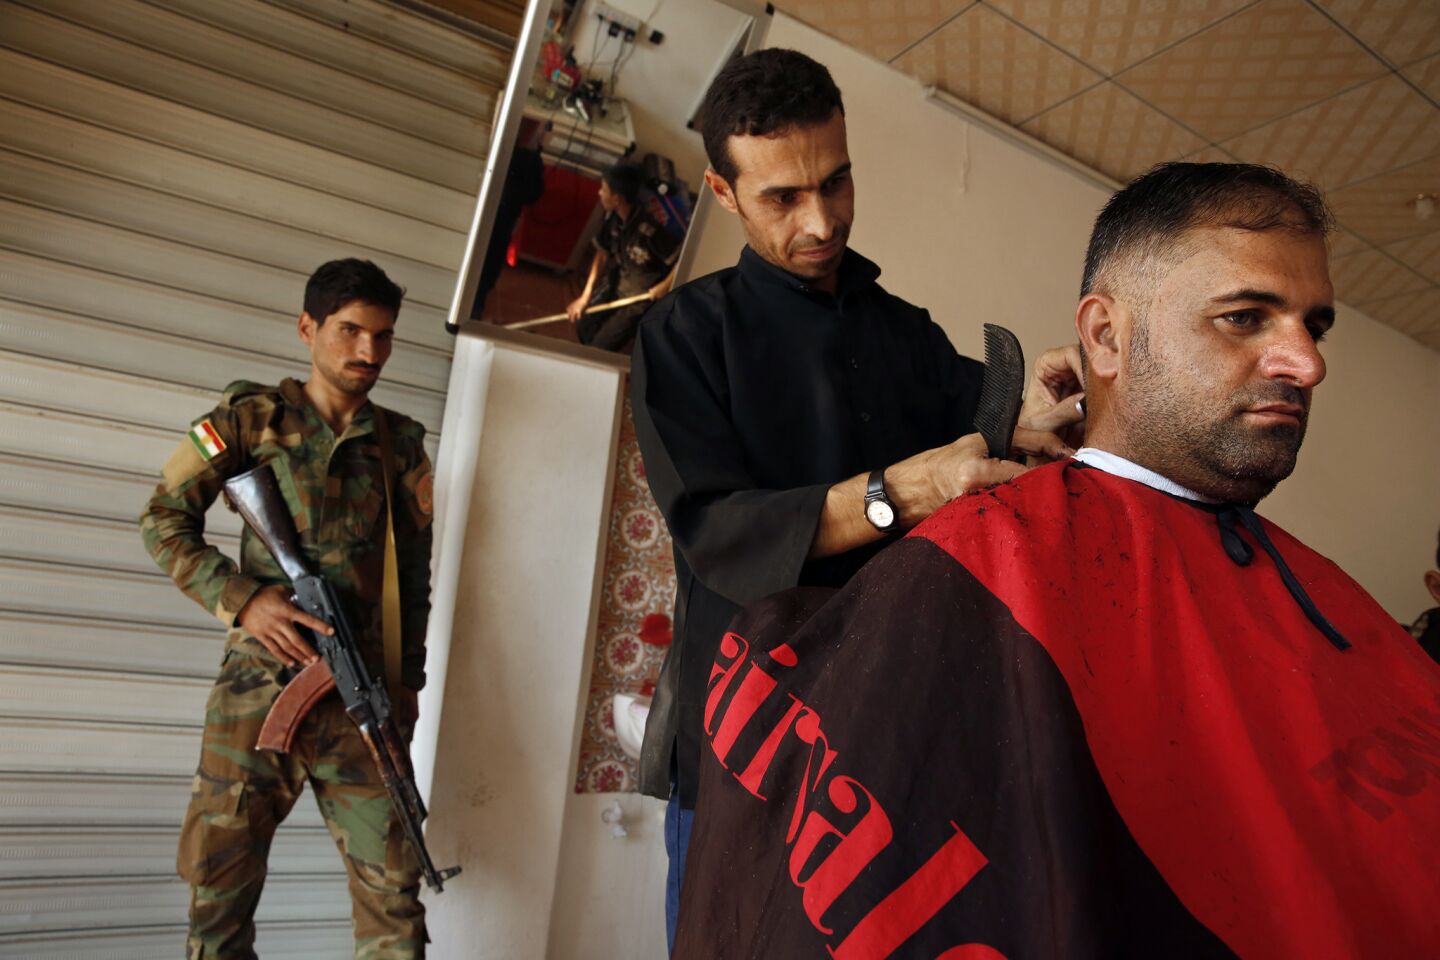 Business is brisk at the barbershops in Faziliya after Kurdish forces retook control from Islamic State militants. A bodyguard stands by.